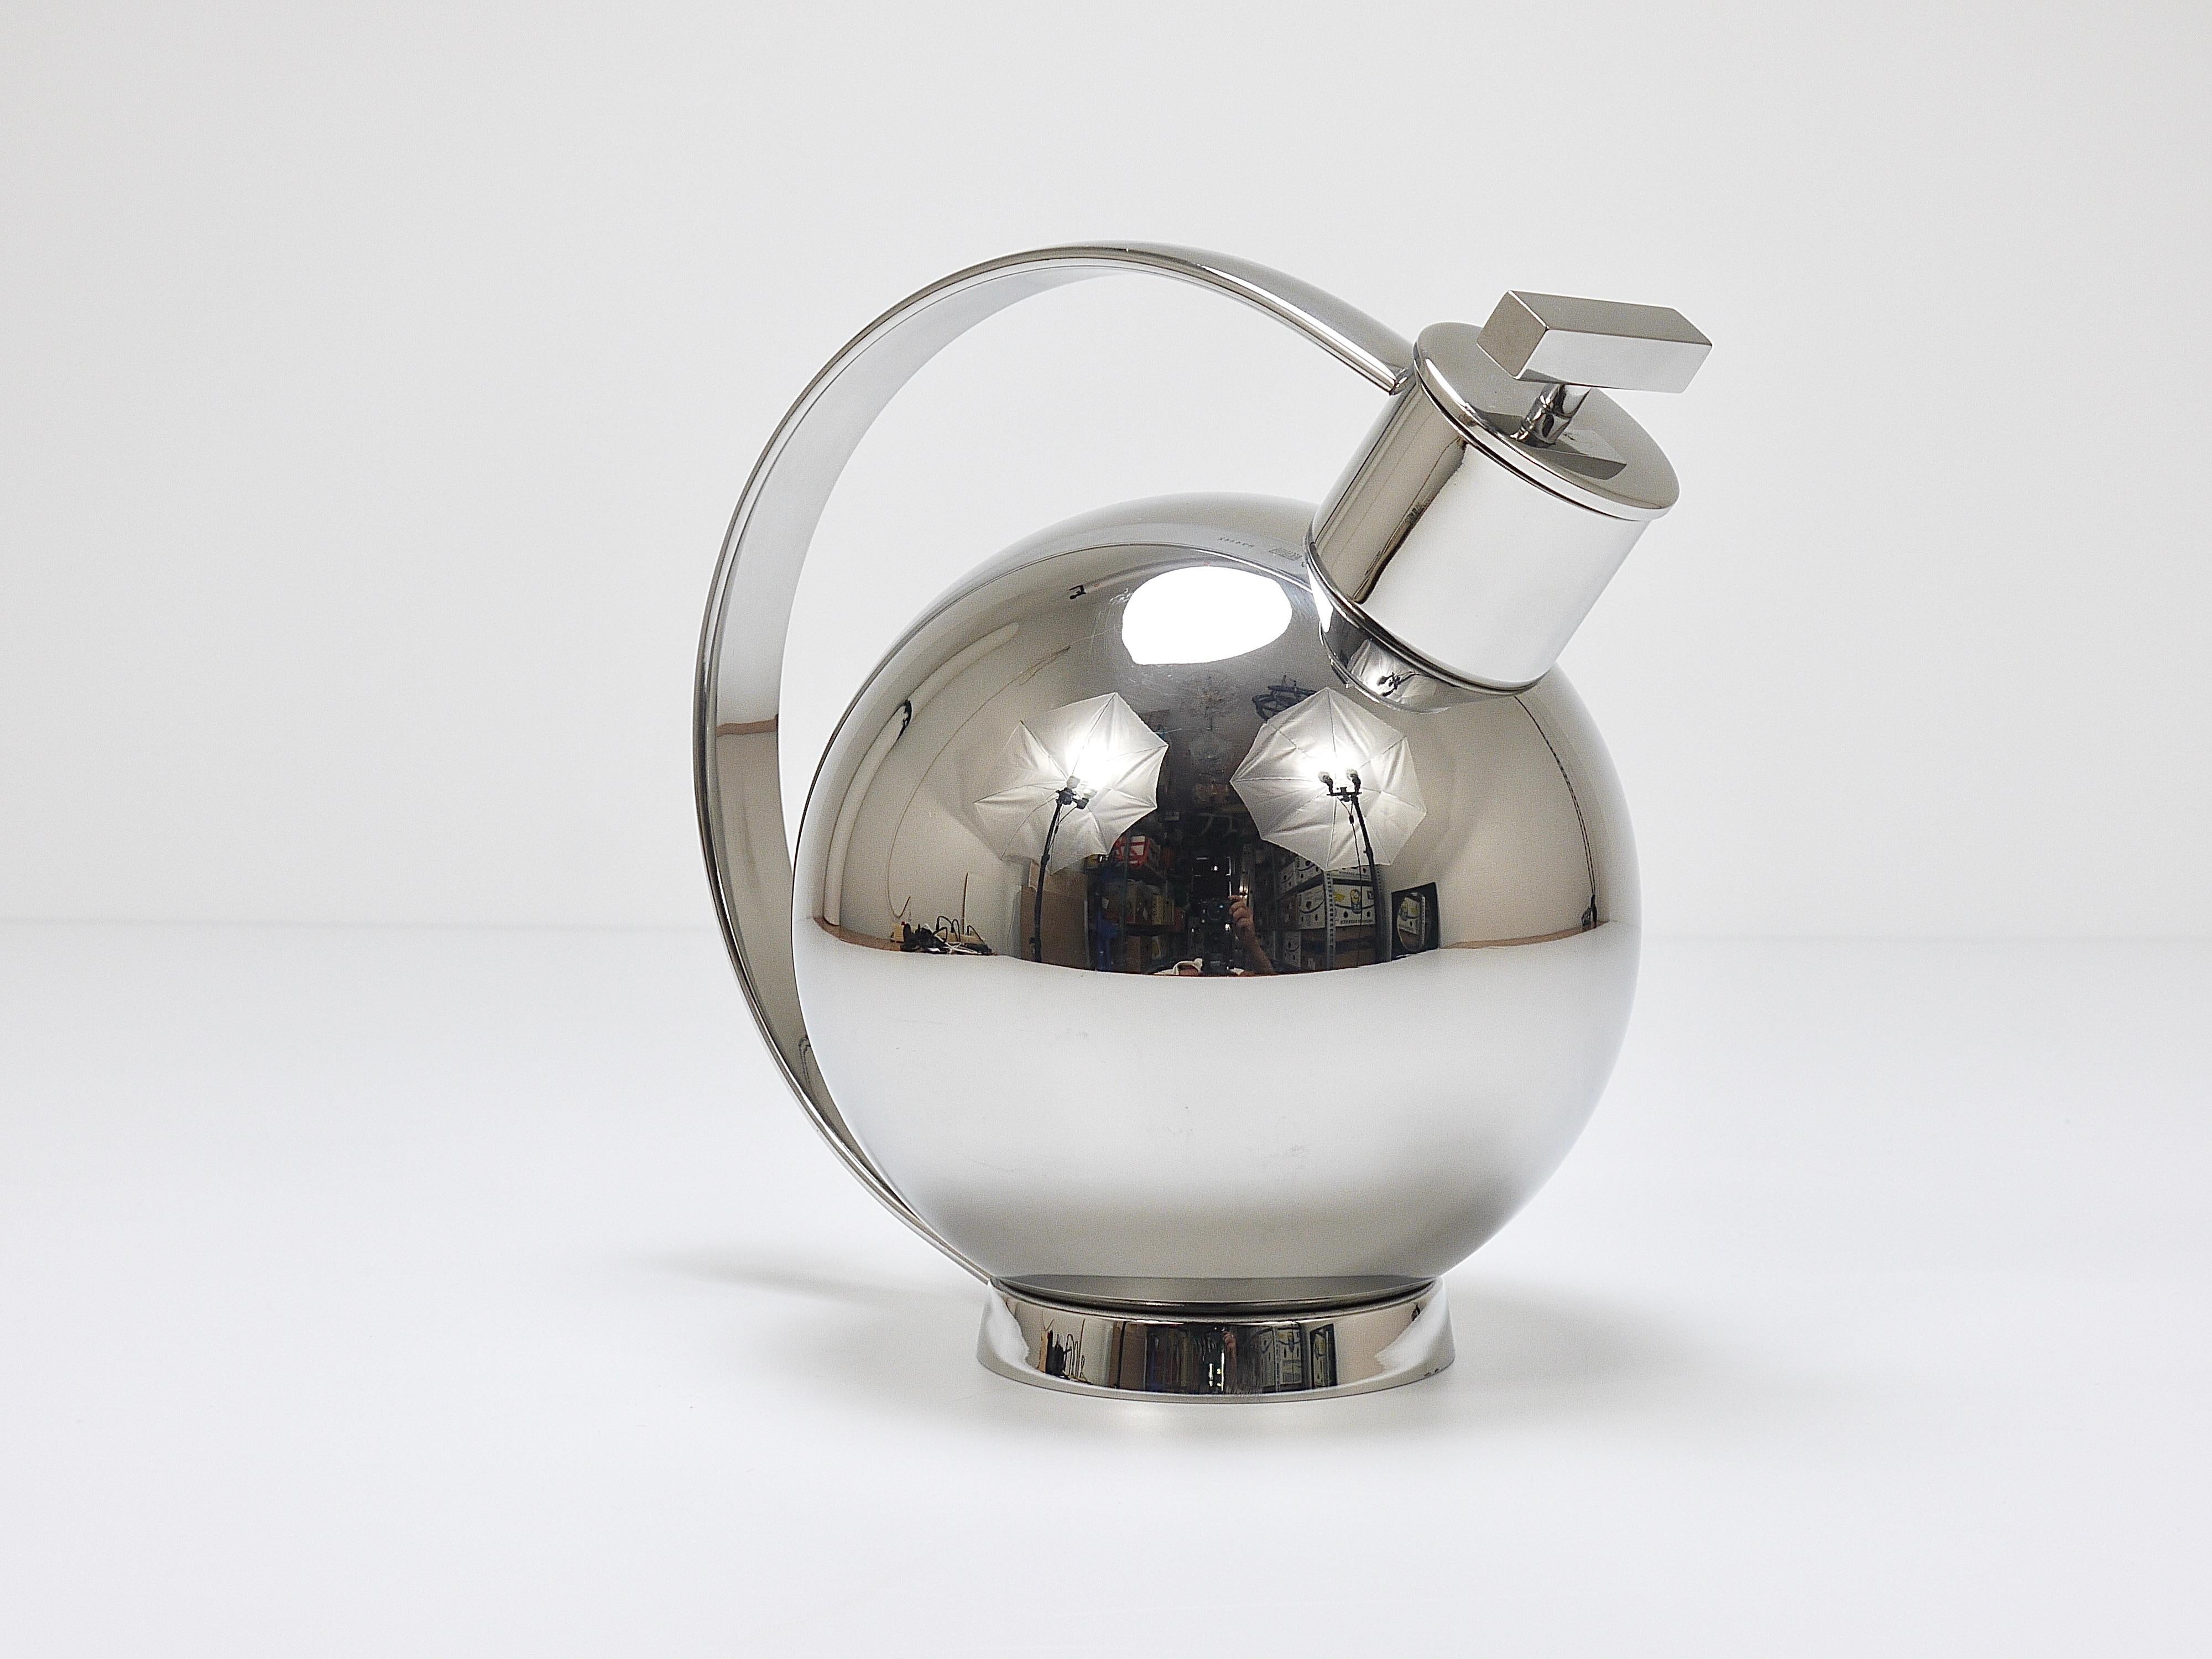 An iconic Art Deco but postmodern cocktail shaker, designed in 1925 by Swedish designer Sylvia Stave (1908 - 1994), reissued in 1989 by Officina Alessi Italy. Model no. 90021, made of chrome-plated 18/10 stainless steel, this beautiful object is